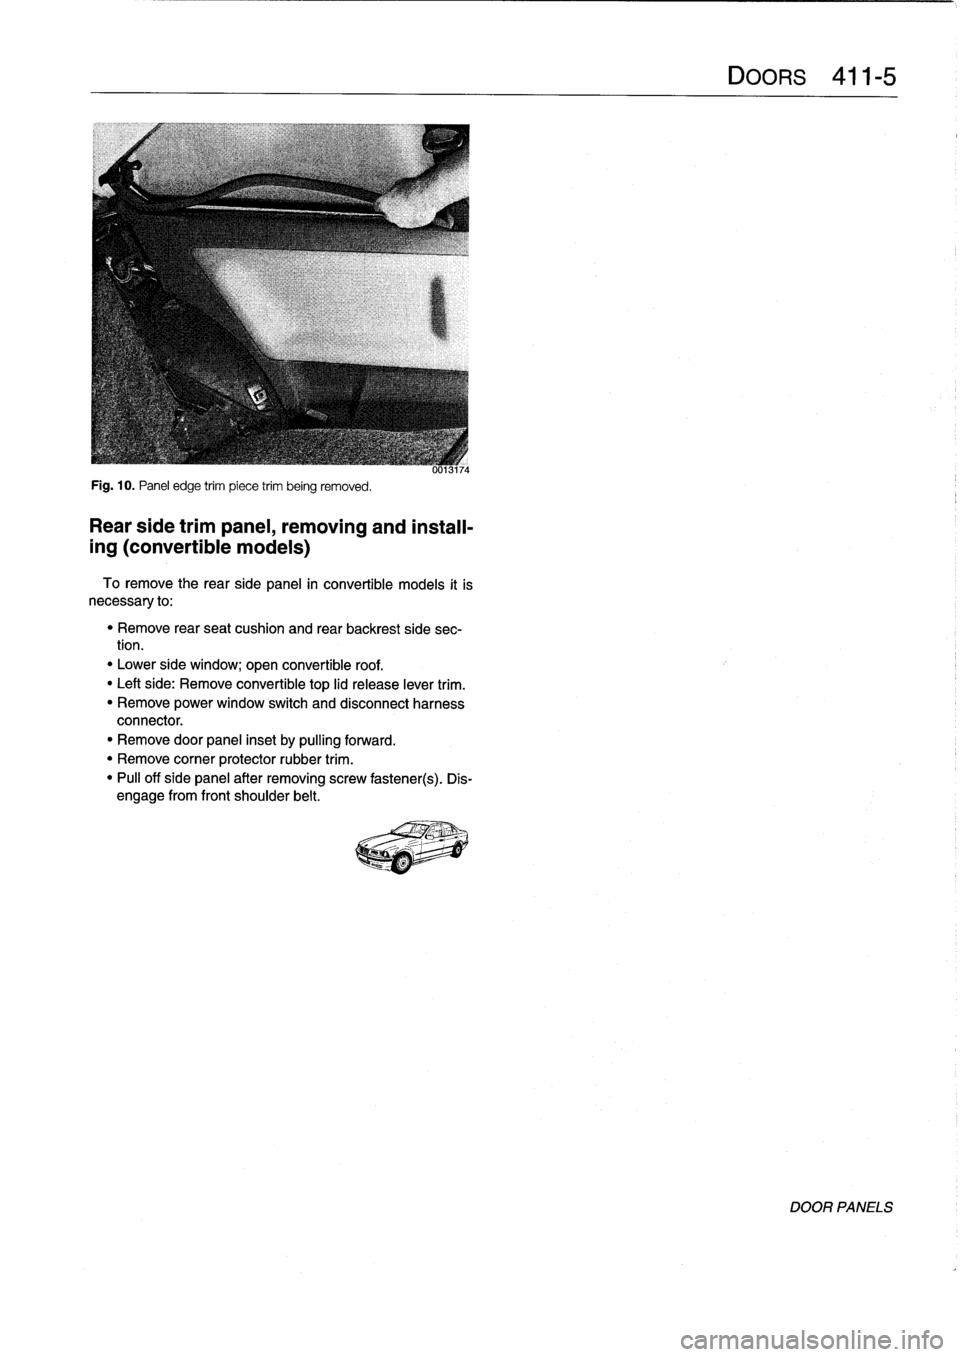 BMW 318i 1995 E36 Workshop Manual 
Fig
.
10
.
Panel
edge
trim
piece
trim
being
removed
.

Rear
side
trimpanel,
removing
and
install-

ing
(convertible
models)

To
remove
the
rearside
panel
in
convertible
models
it
is
necessary
to
:

"